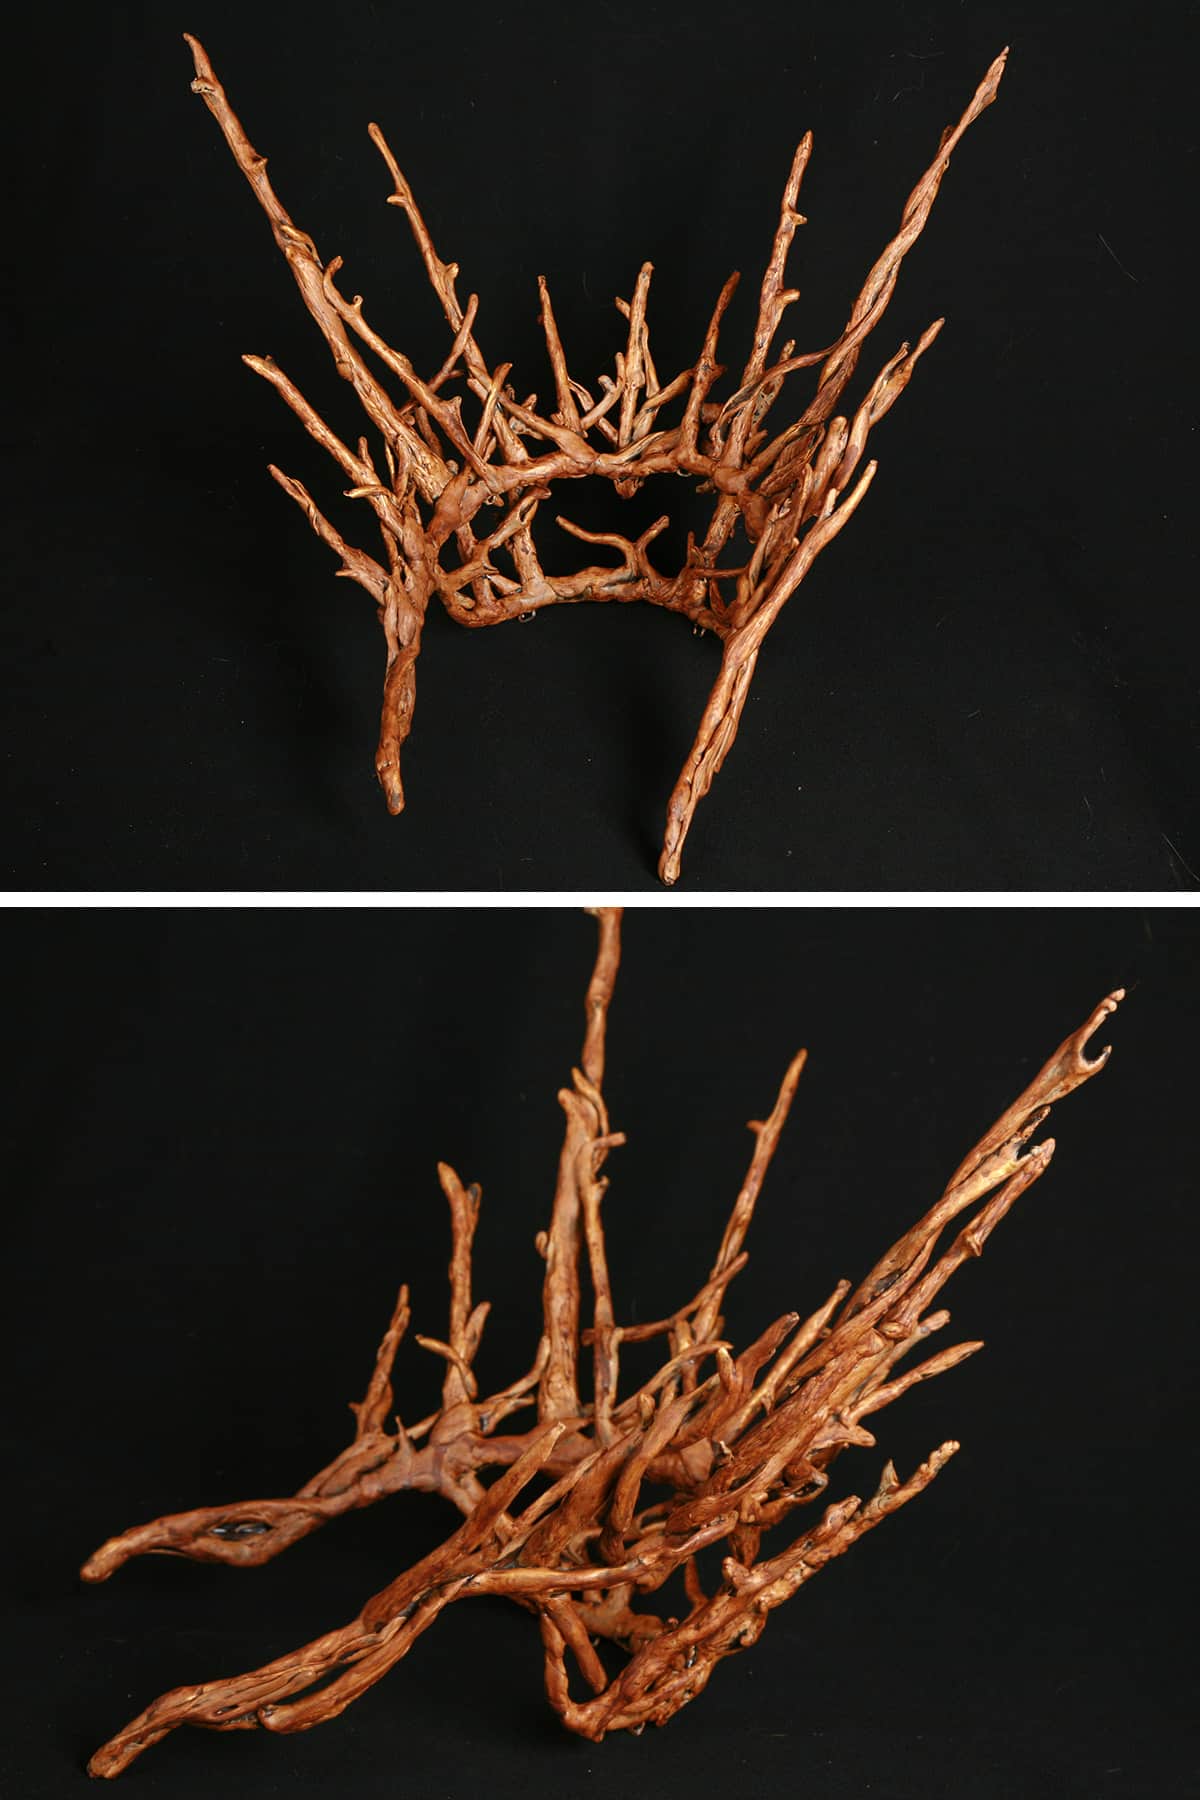 A multi part image showing differnt views of a plastic replica of Thranduil's crown, painted to look realistically like wooden twigs.